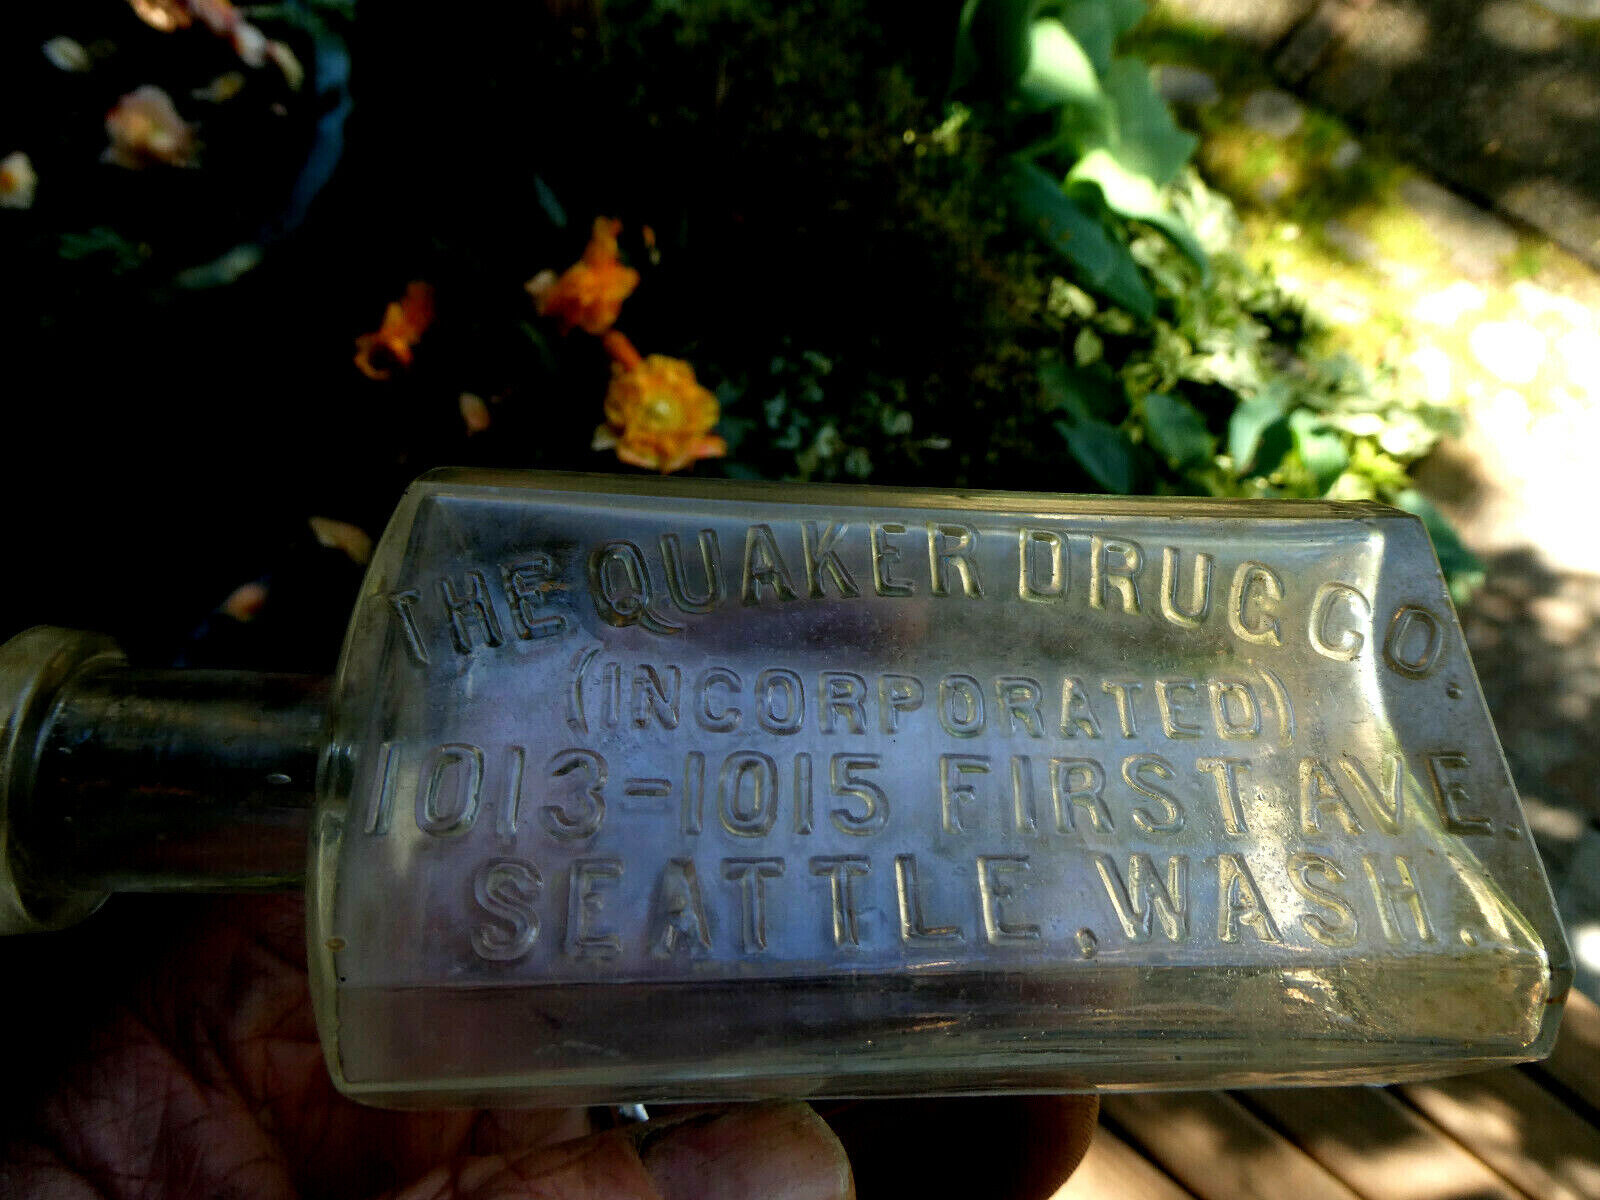 Rare  THE QUAKER DRUG CO INCORPORATED 1013-1015 FIRST AVE. SEATTLE, WASH.